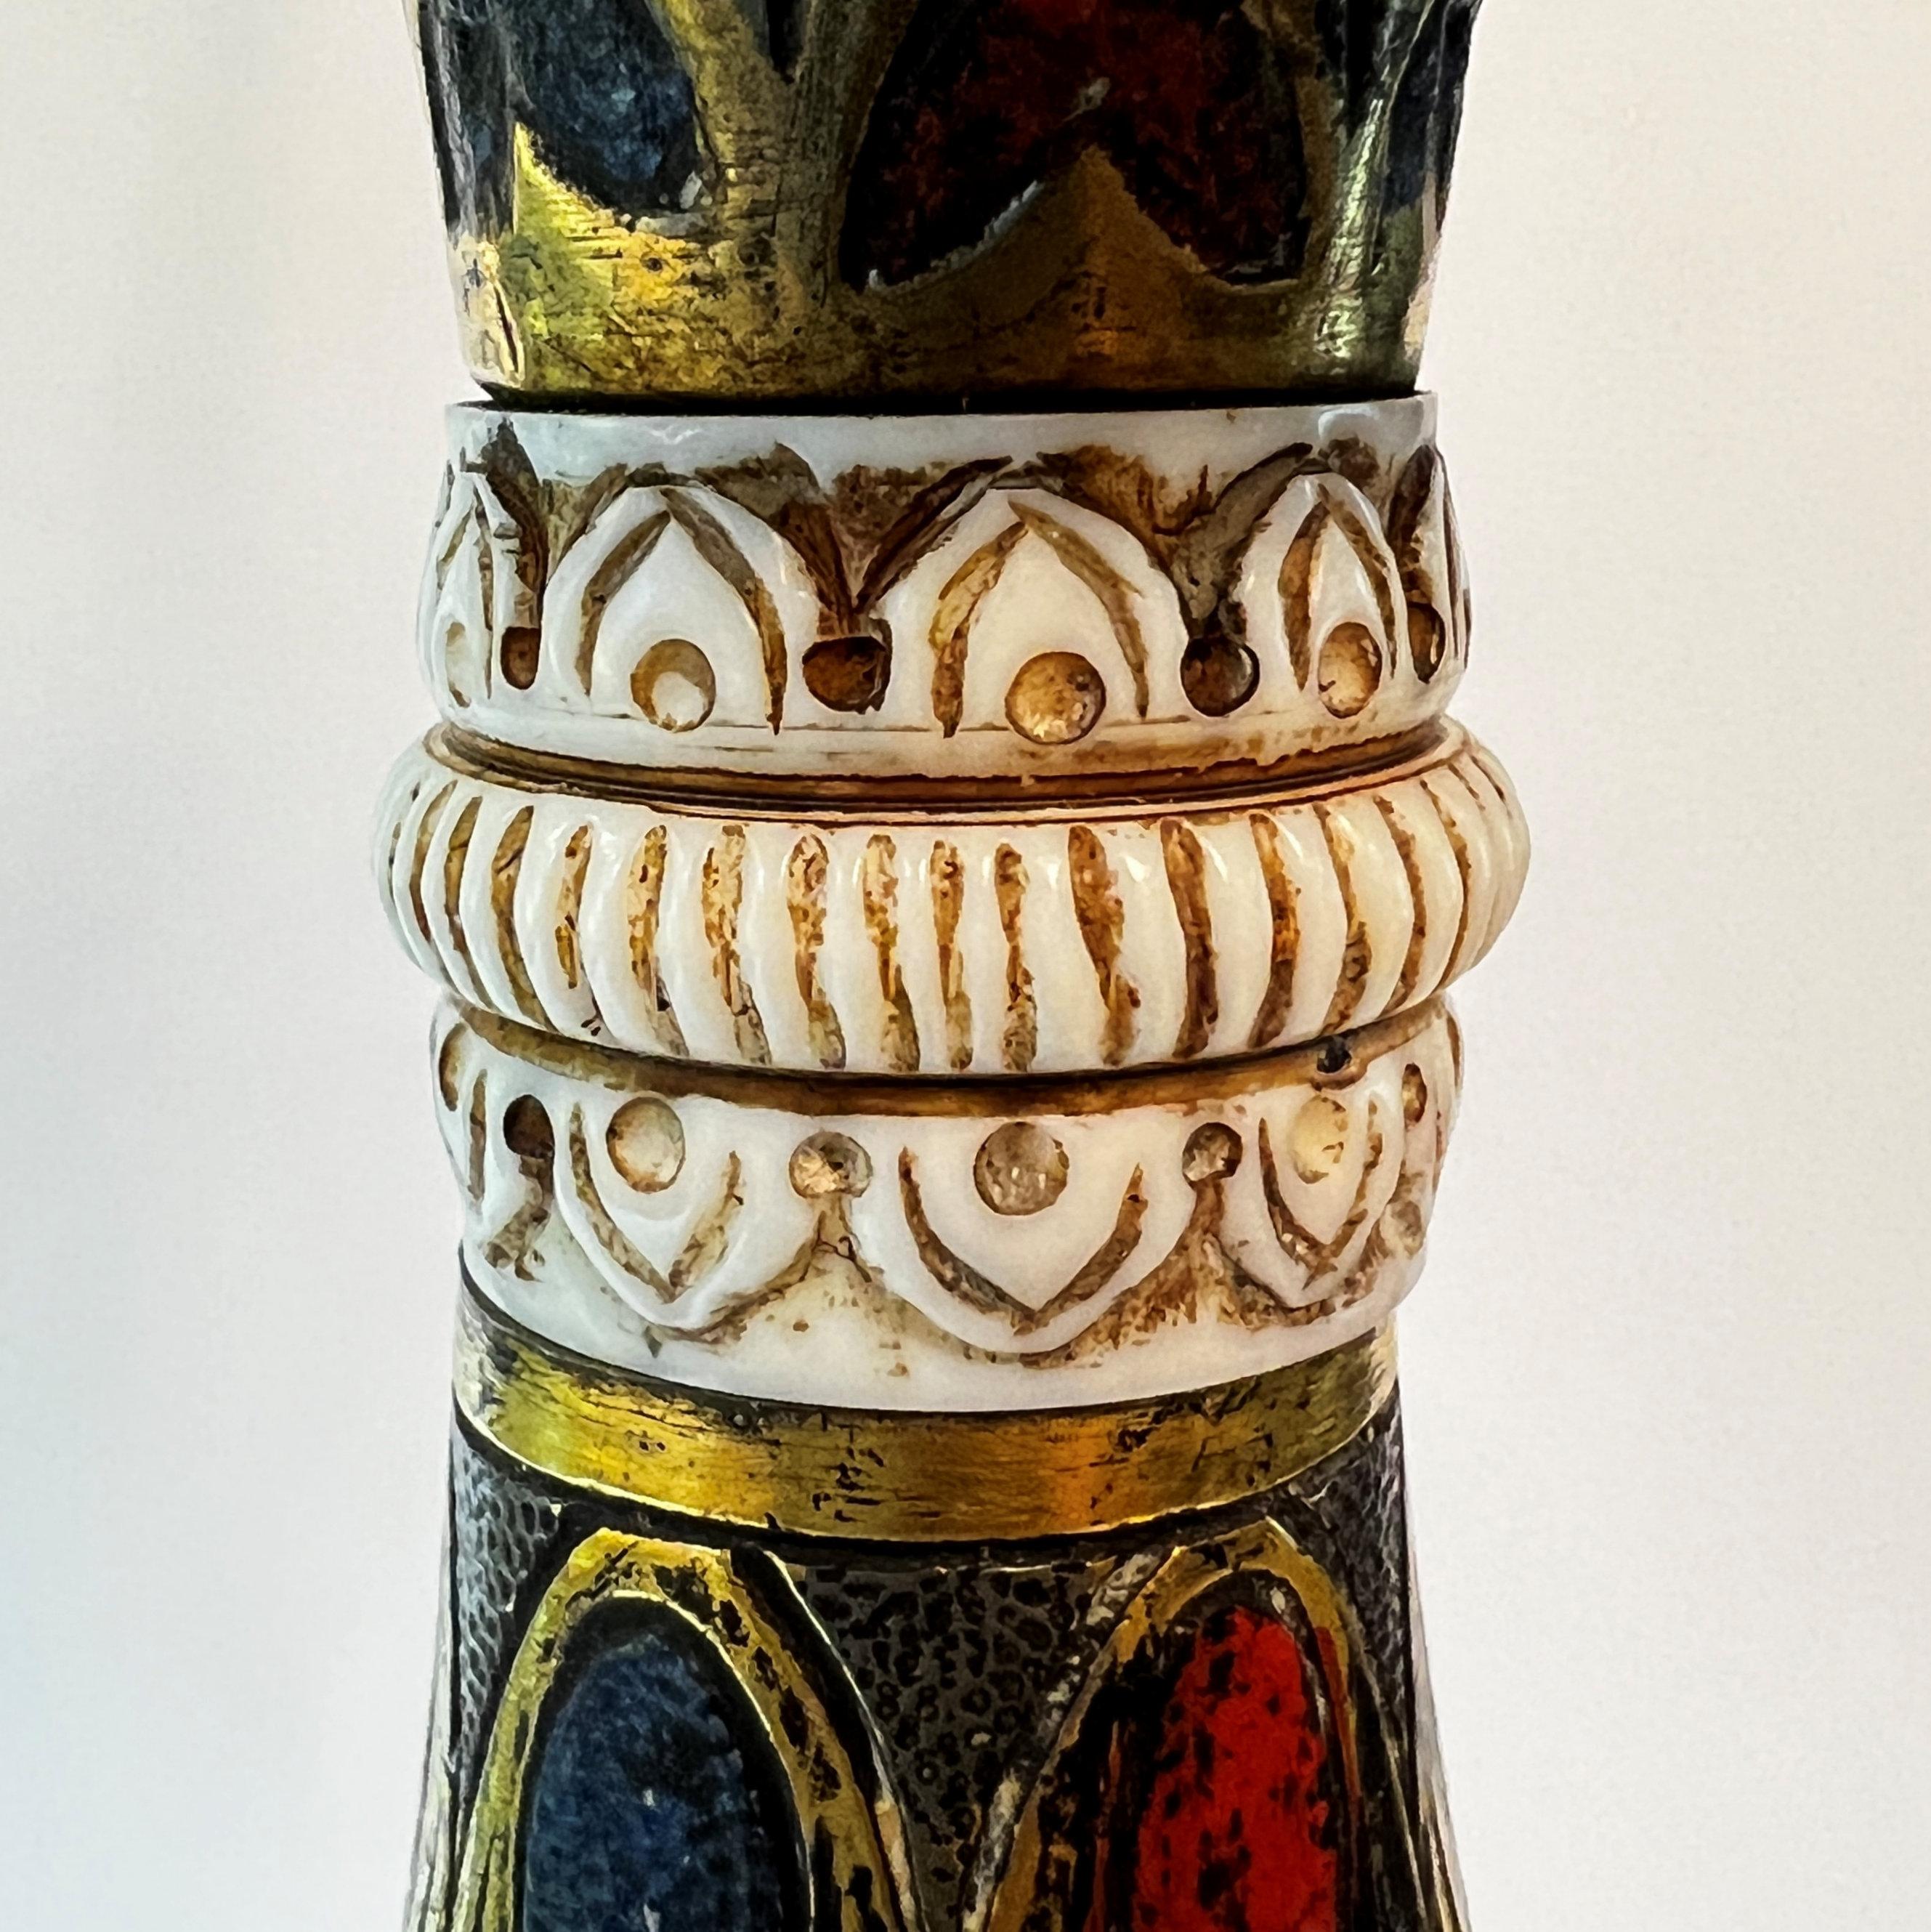 20th Century Renaissance Revival Enameled Bronze and Ivory Table Lamp by E.F. Caldwell For Sale